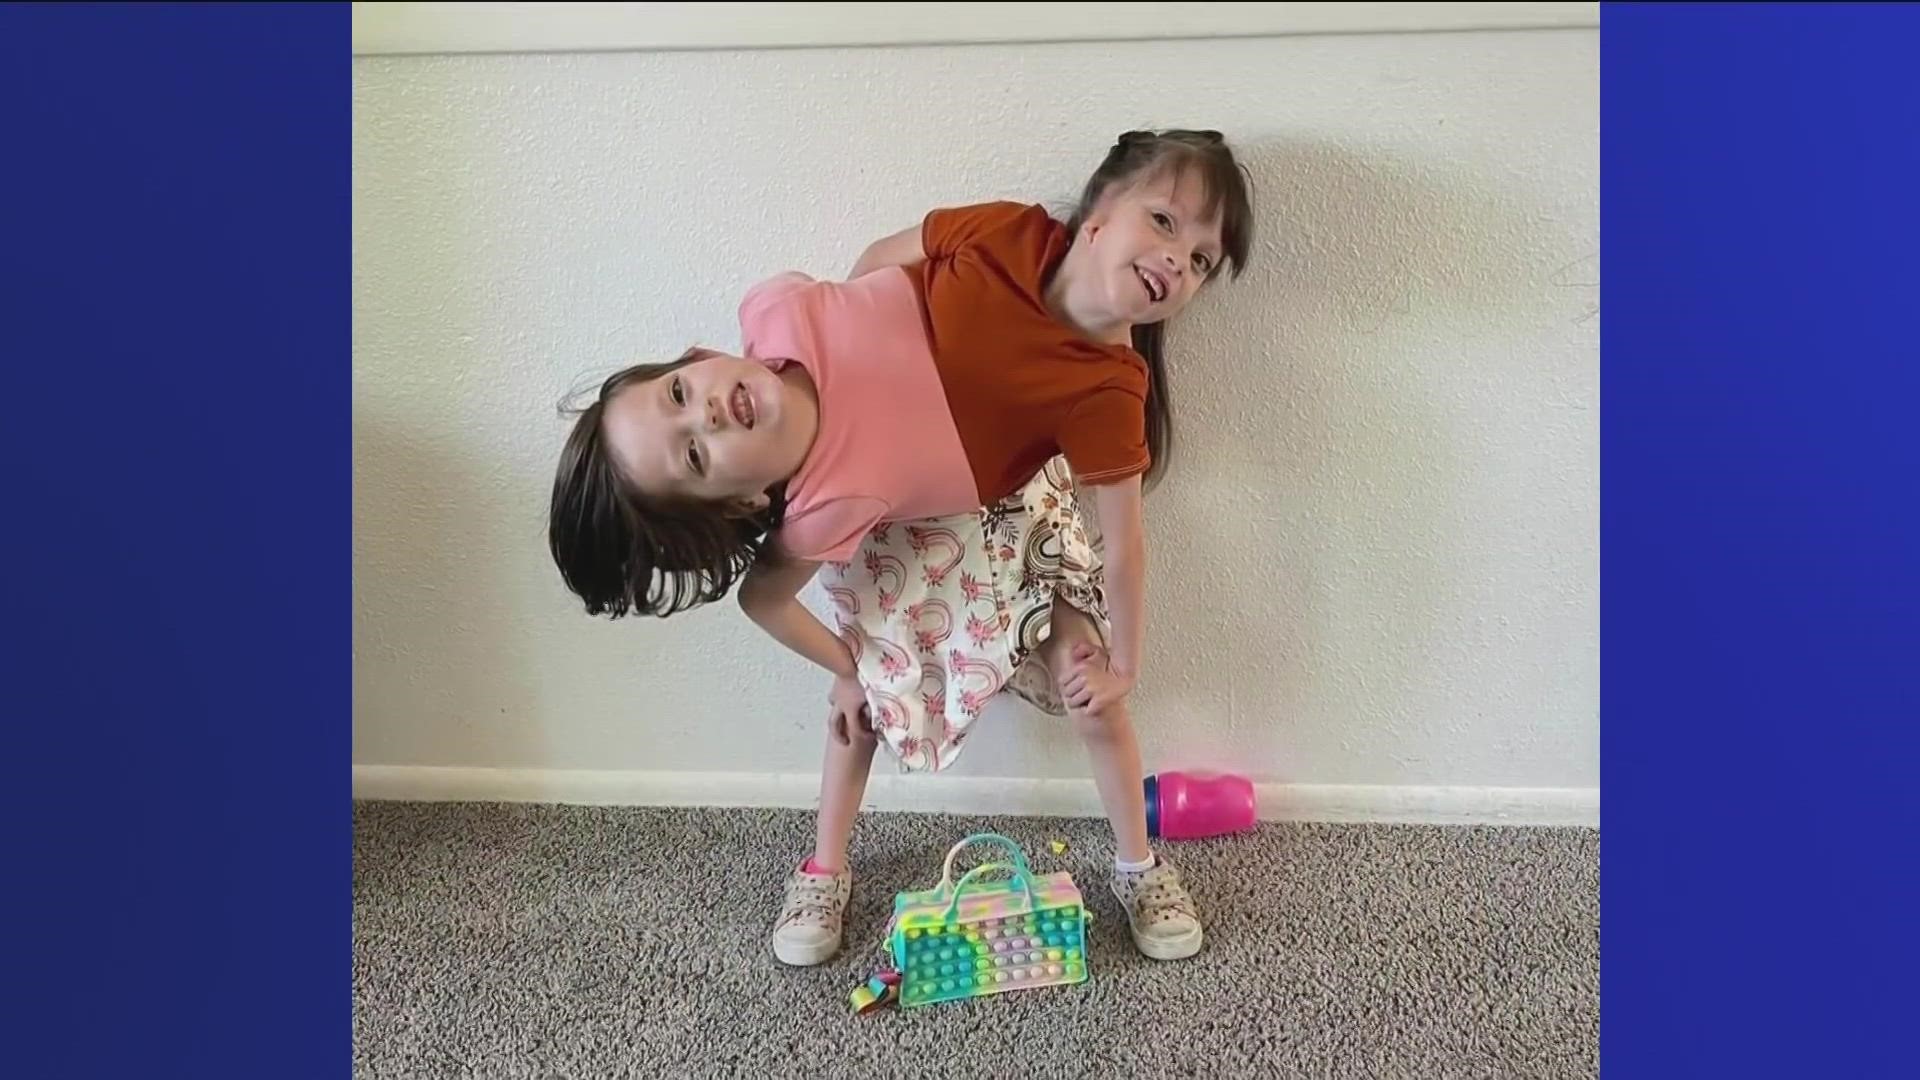 6-year-old girls Callie and Carter Torres are conjoined twins from eastern Idaho. Their mom shares their lives on social media to raise awareness.